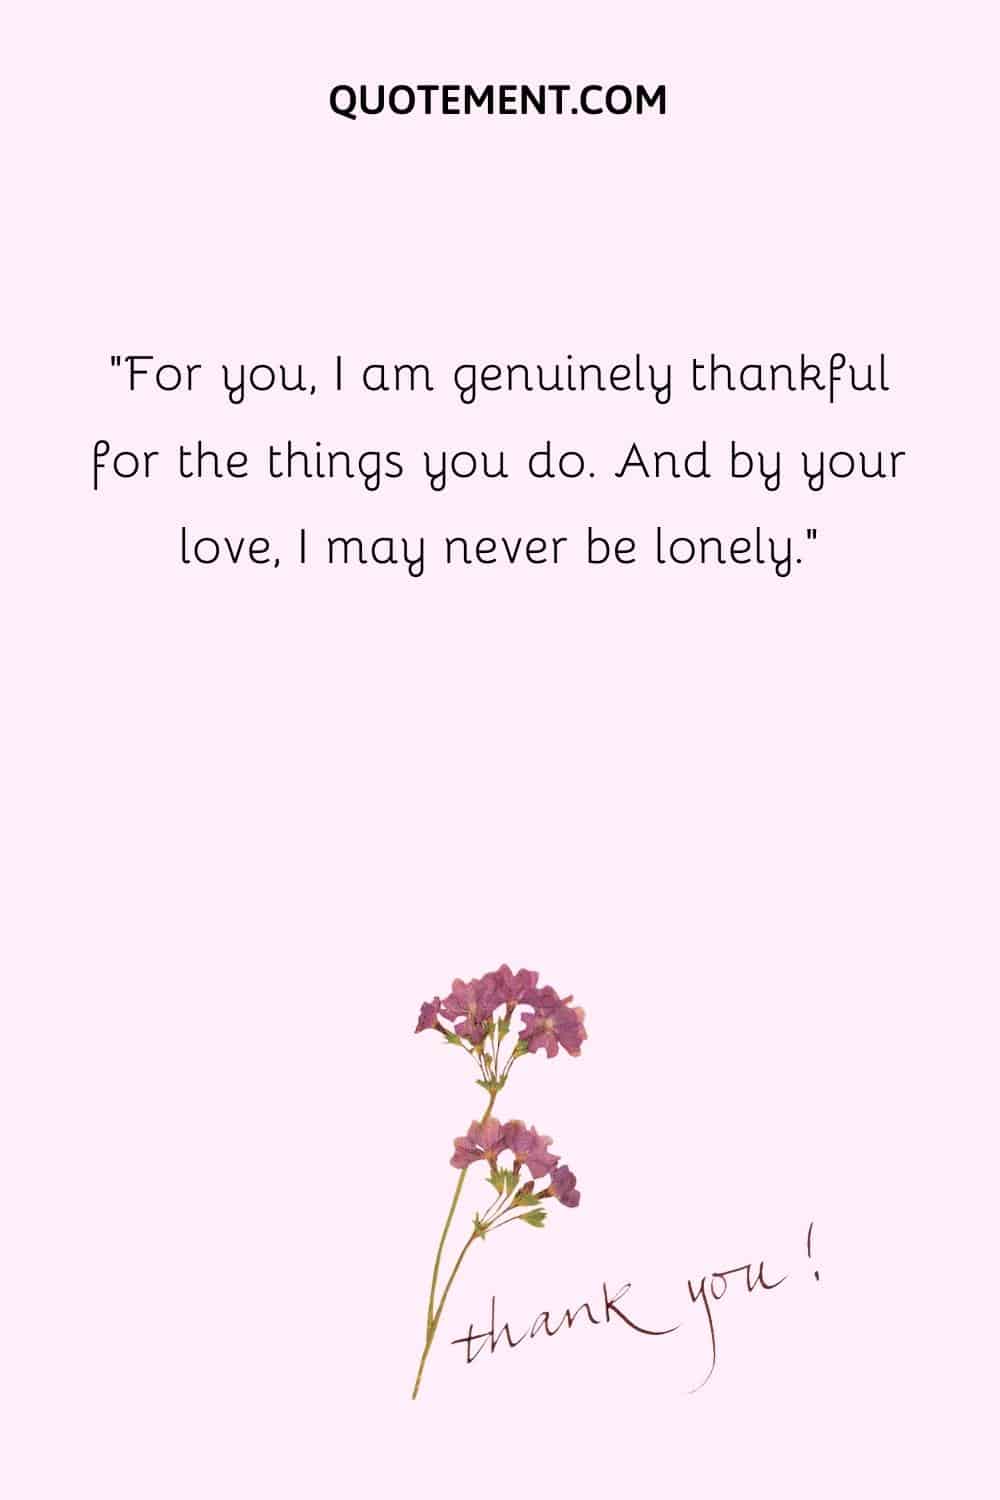 For you, I am genuinely thankful for the things you do. And by your love, I may never be lonely.